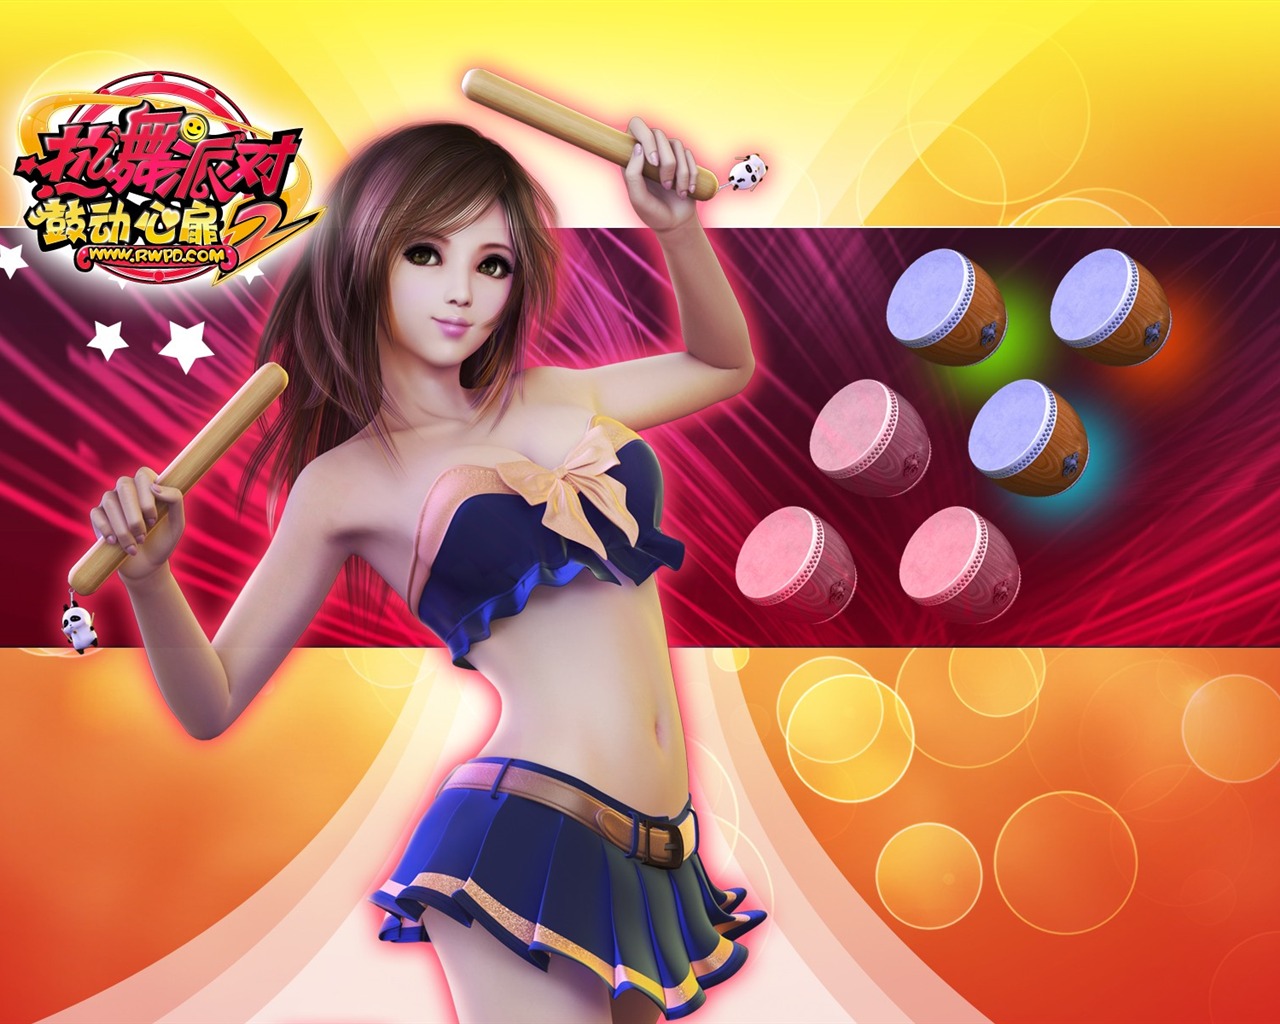 Online game Hot Dance Party II official wallpapers #13 - 1280x1024